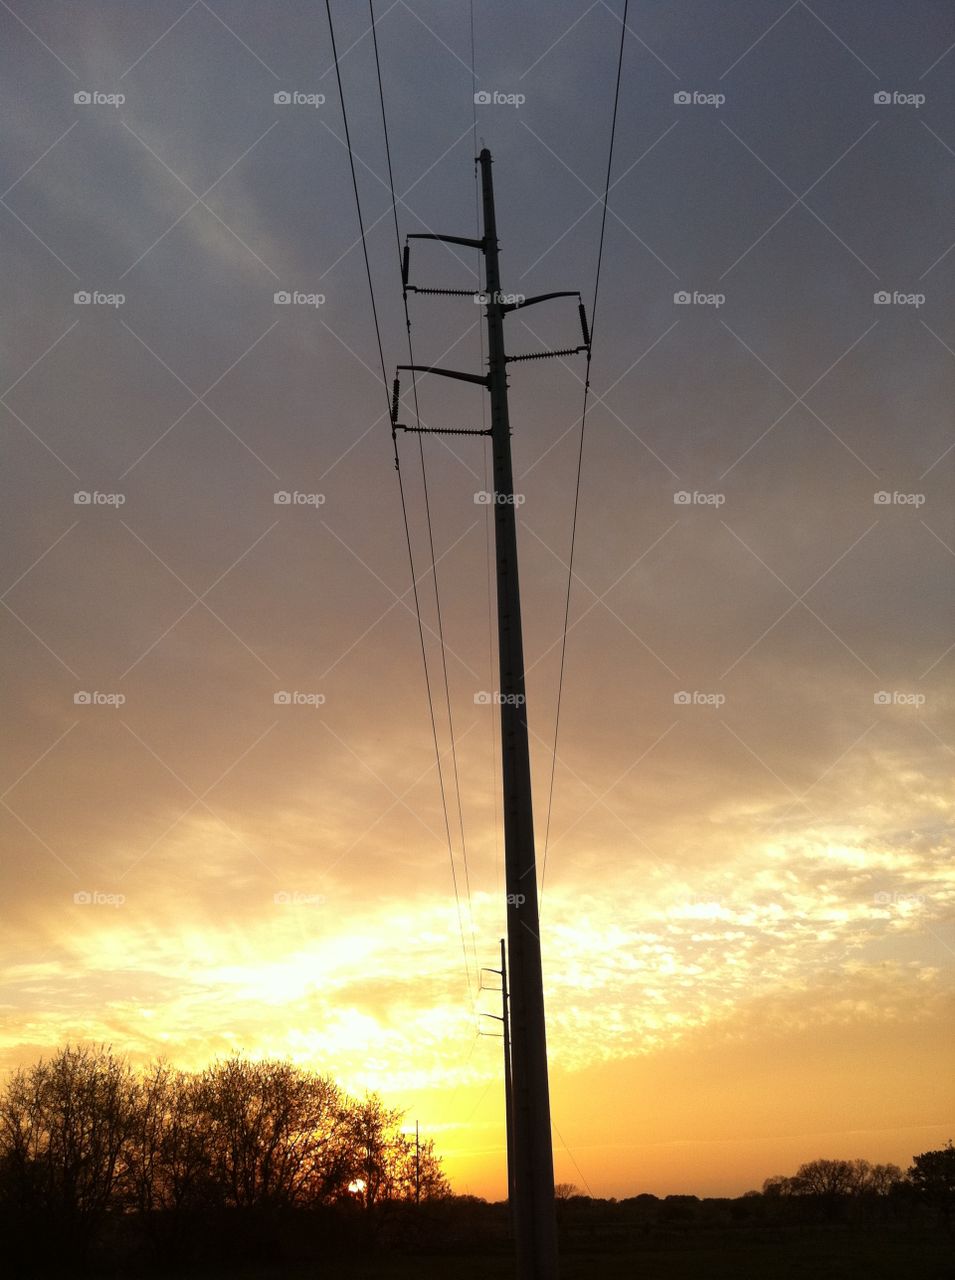 Telephone pole in Texas at sunset. 